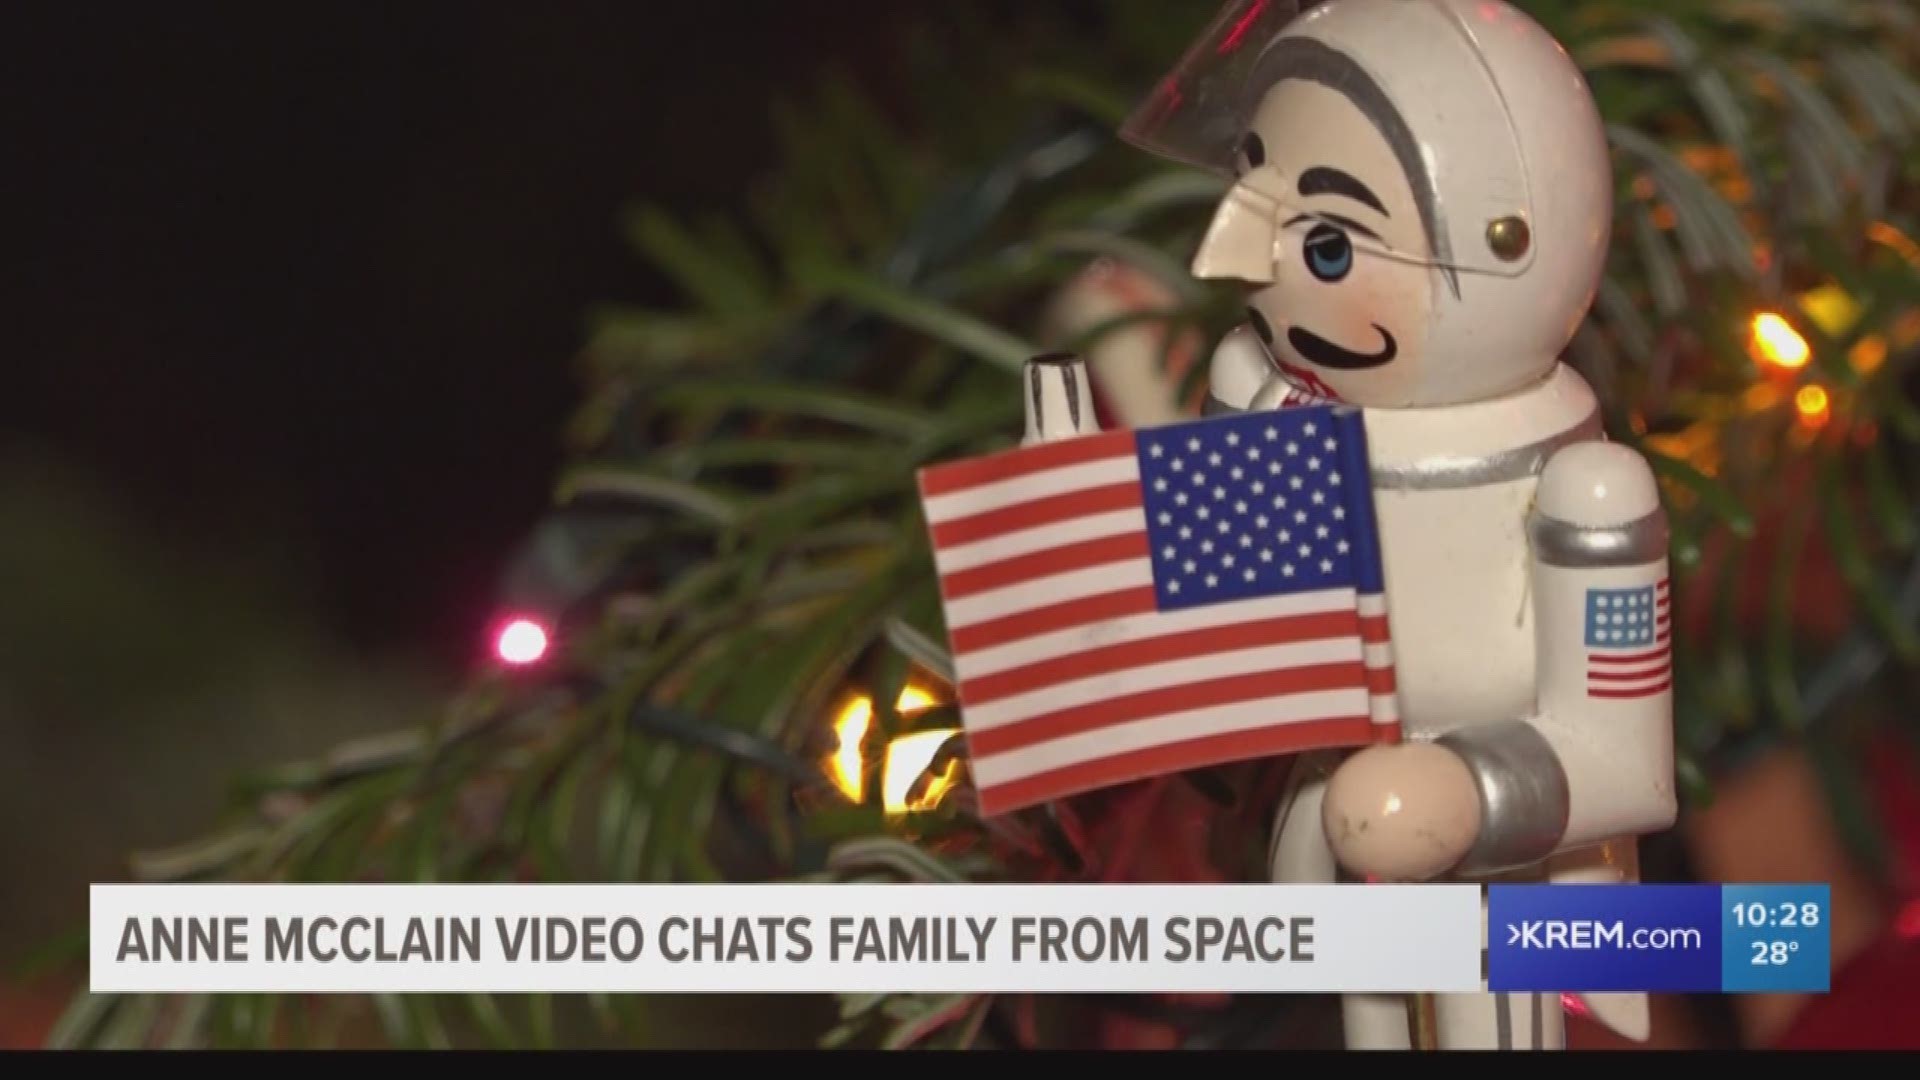 NASA Astronaut and Gonzaga Prep alumnus Anne McClain is spending the holidays in space, but her family is still down on Earth, celebrating without her but always thinking of her.